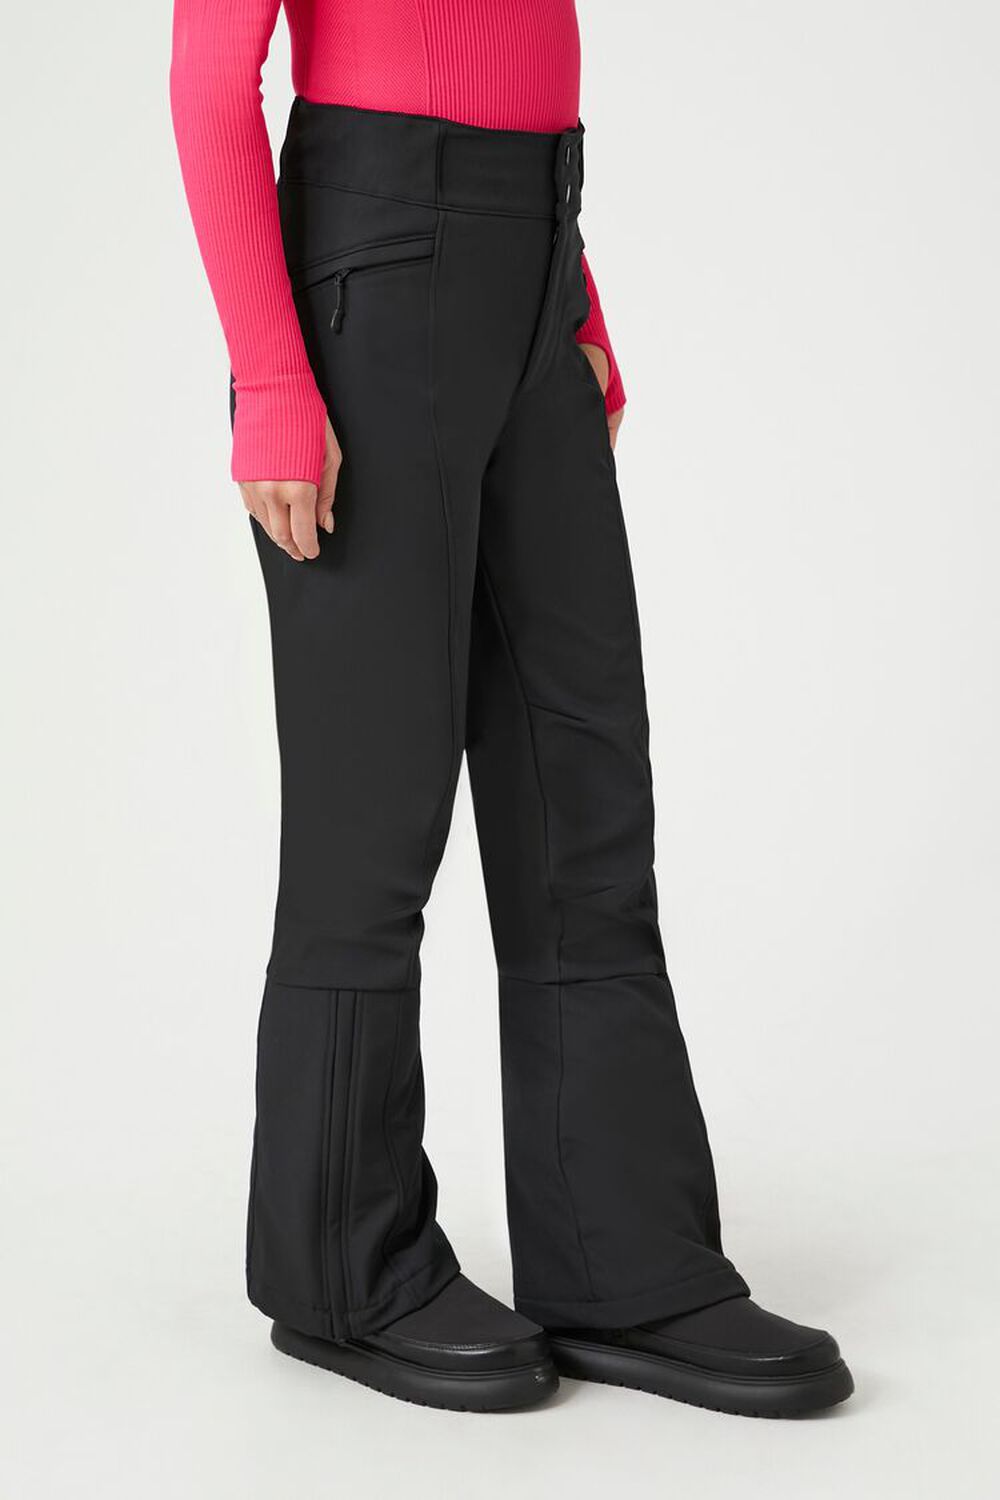 Forever 21 Women's Active Ski High-Rise Flare Pants in Hibiscus, XS -  ShopStyle